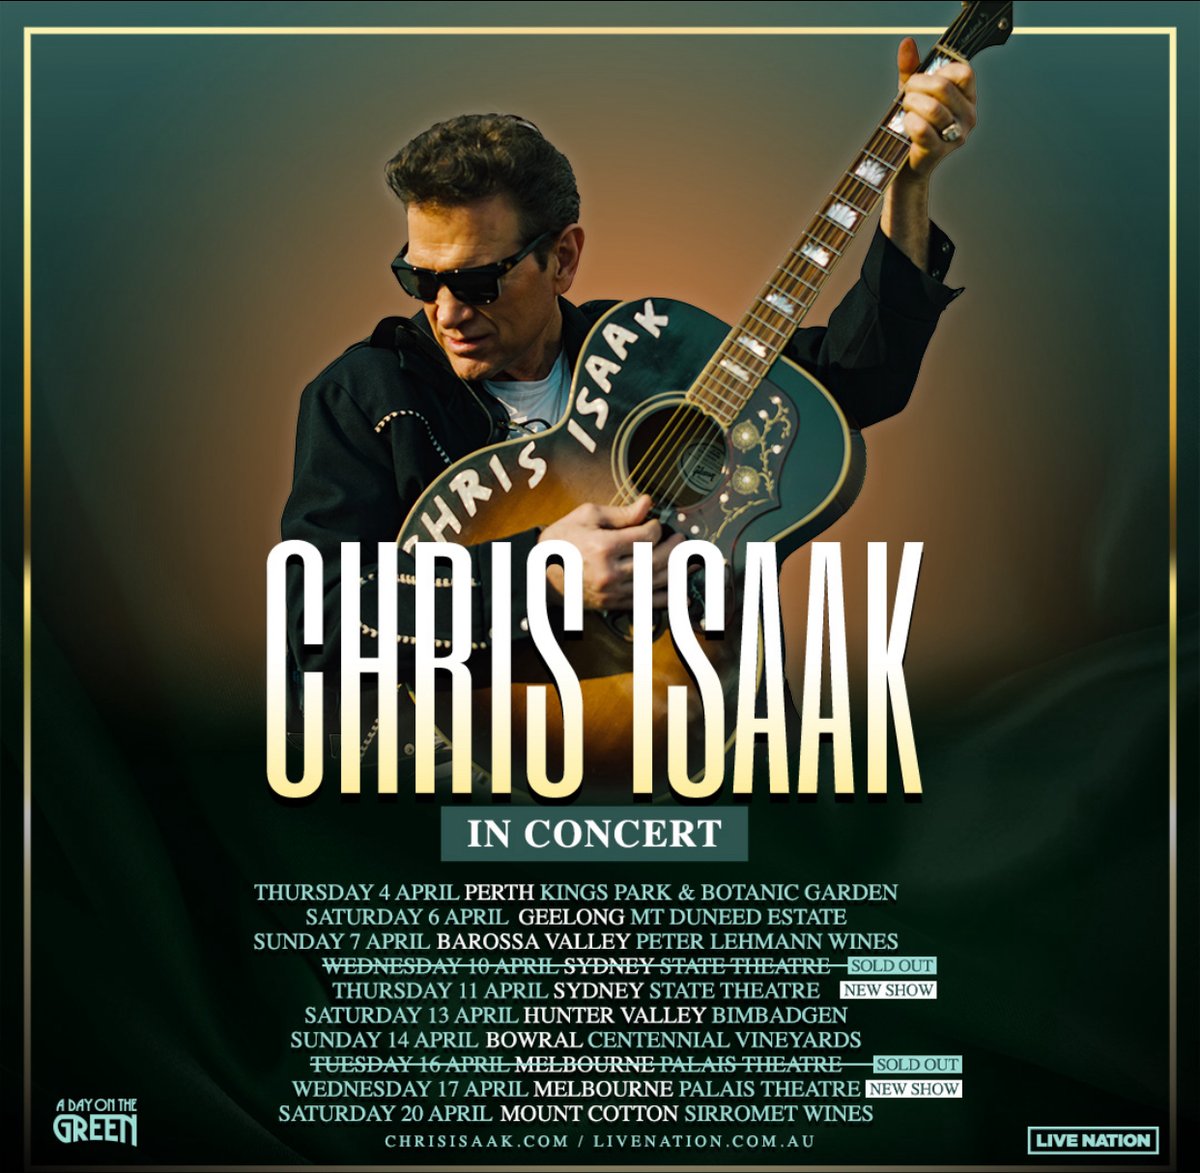 We’re just a month away from our Australia/New Zealand tour… I hope someone has a surfboard I can borrow! The guys and I are counting down the days… Tickets are still up for grabs, click the link to secure yours now: chrisisaak.com/tour/